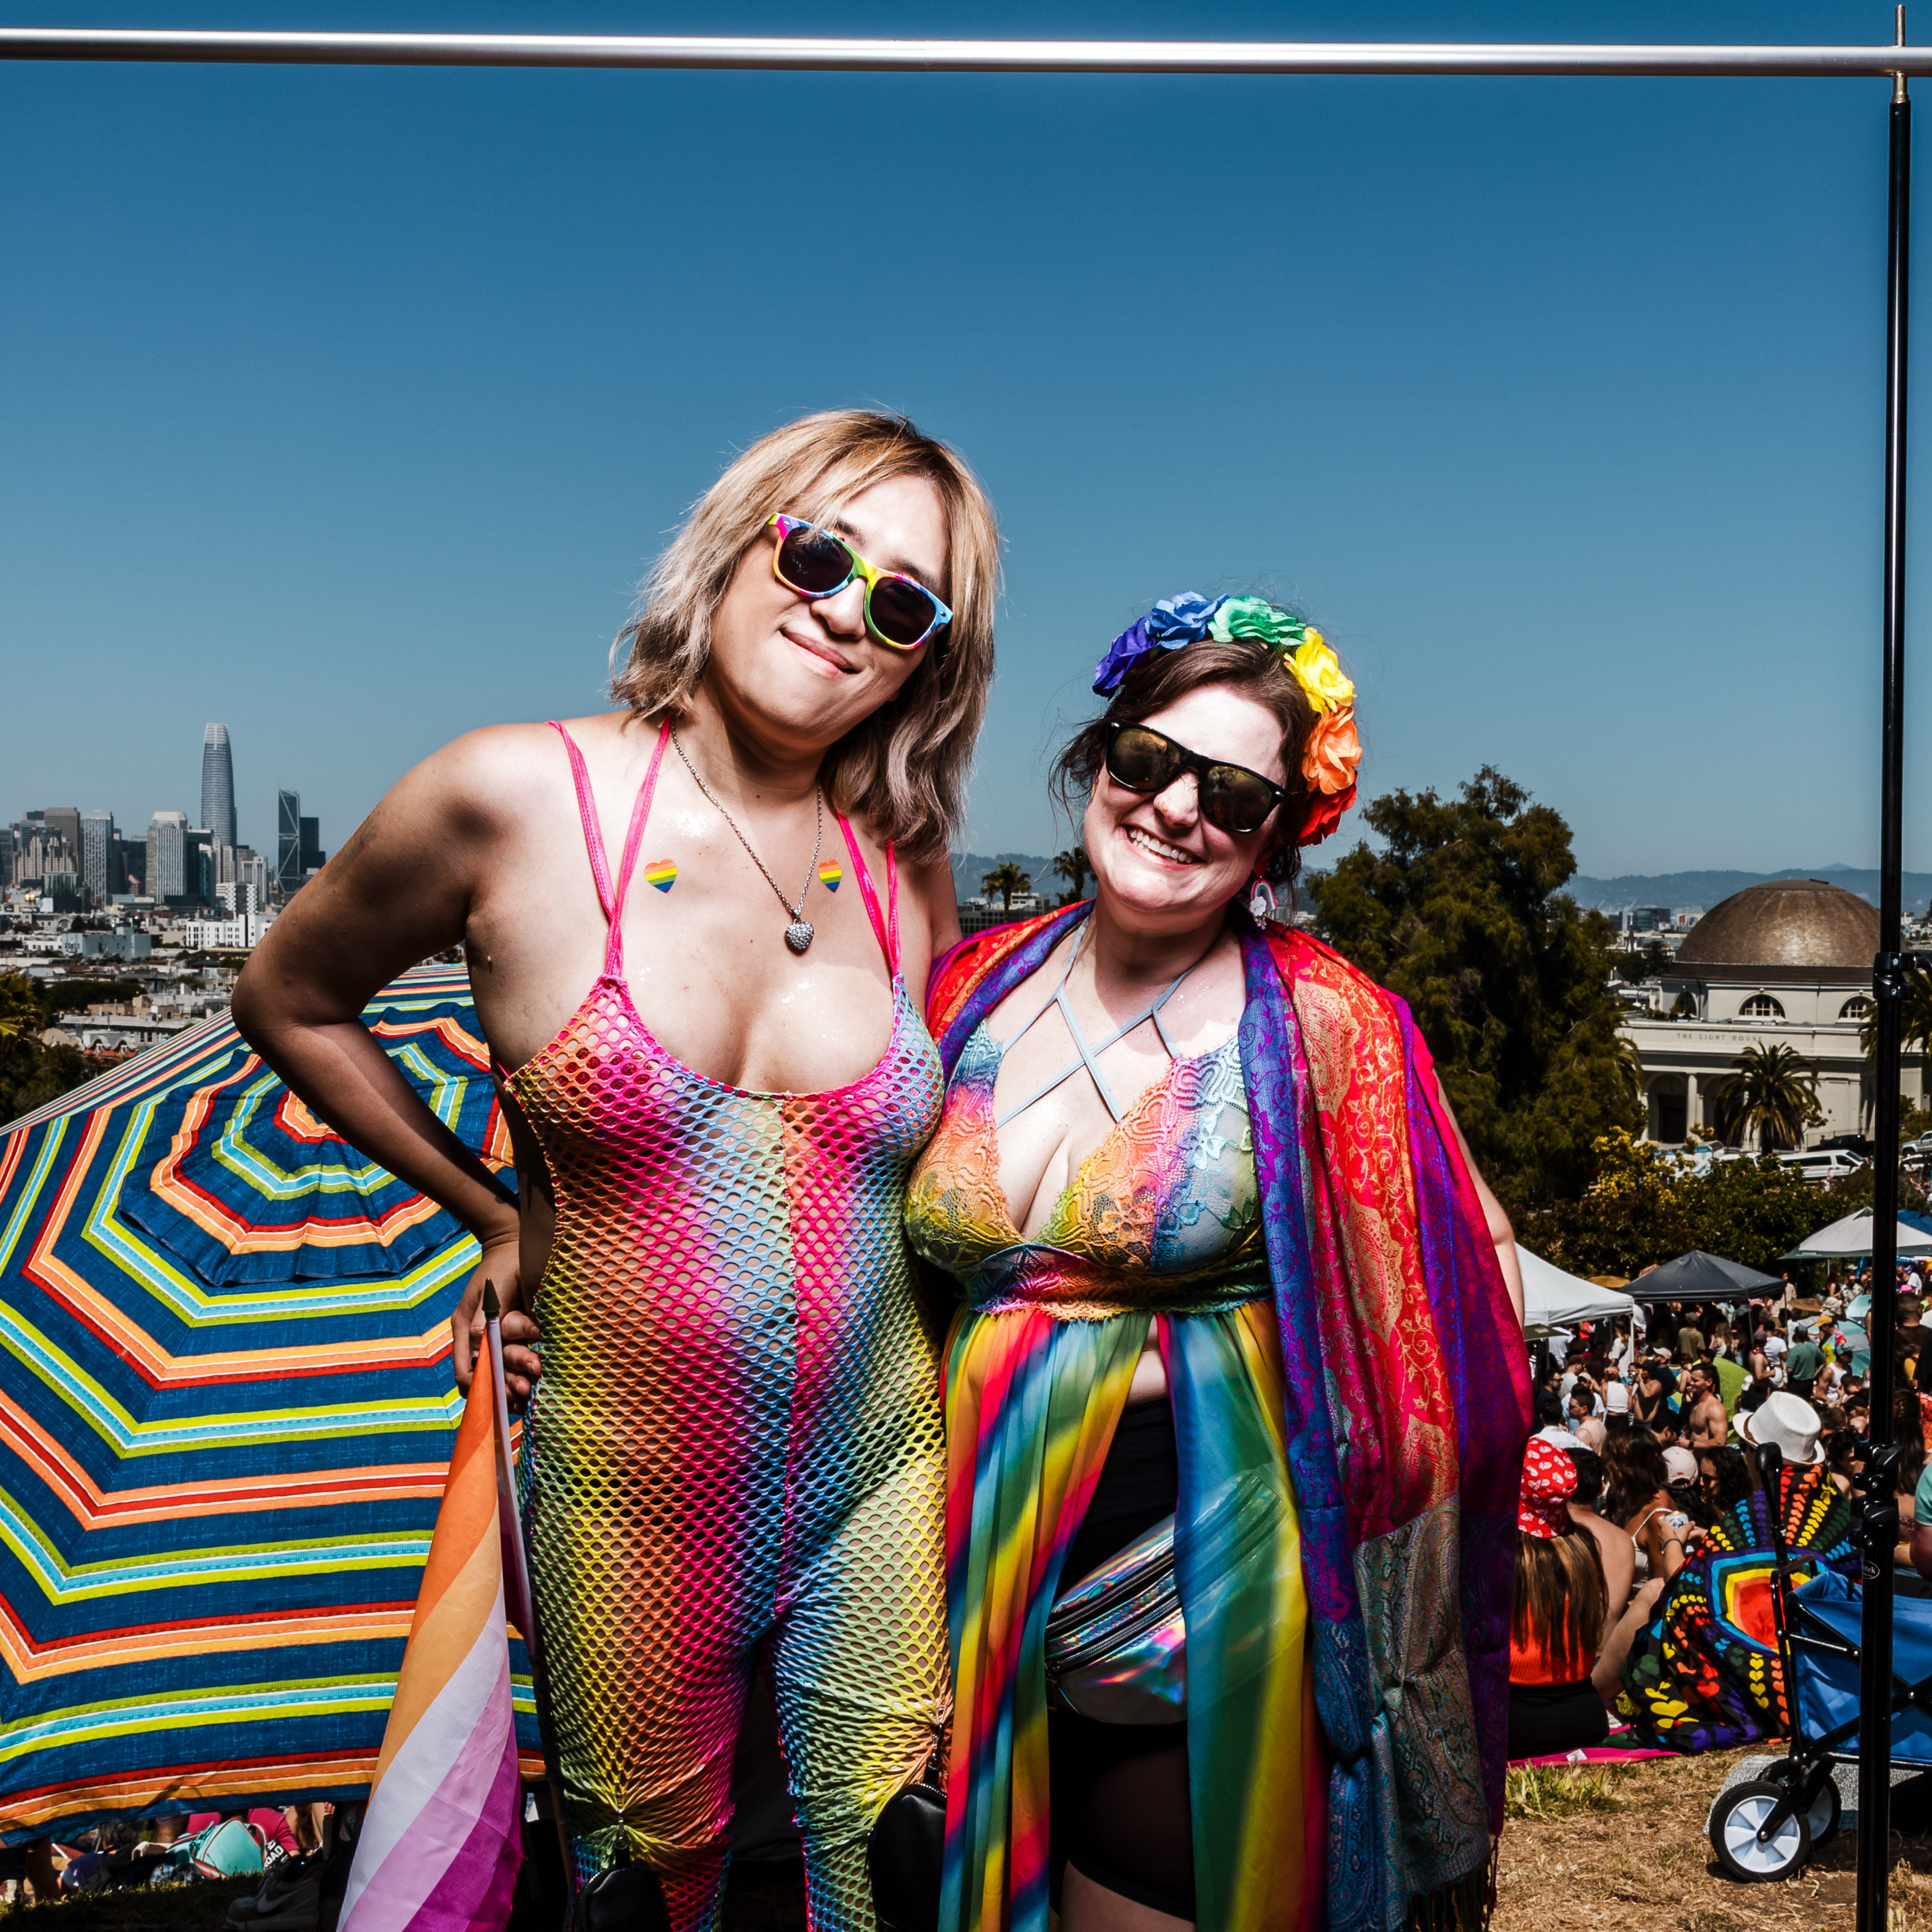 Two people in rainbow clothing and sunglasses stand smiling at a crowded outdoor event with a vibrant cityscape and colorful umbrella in the background.